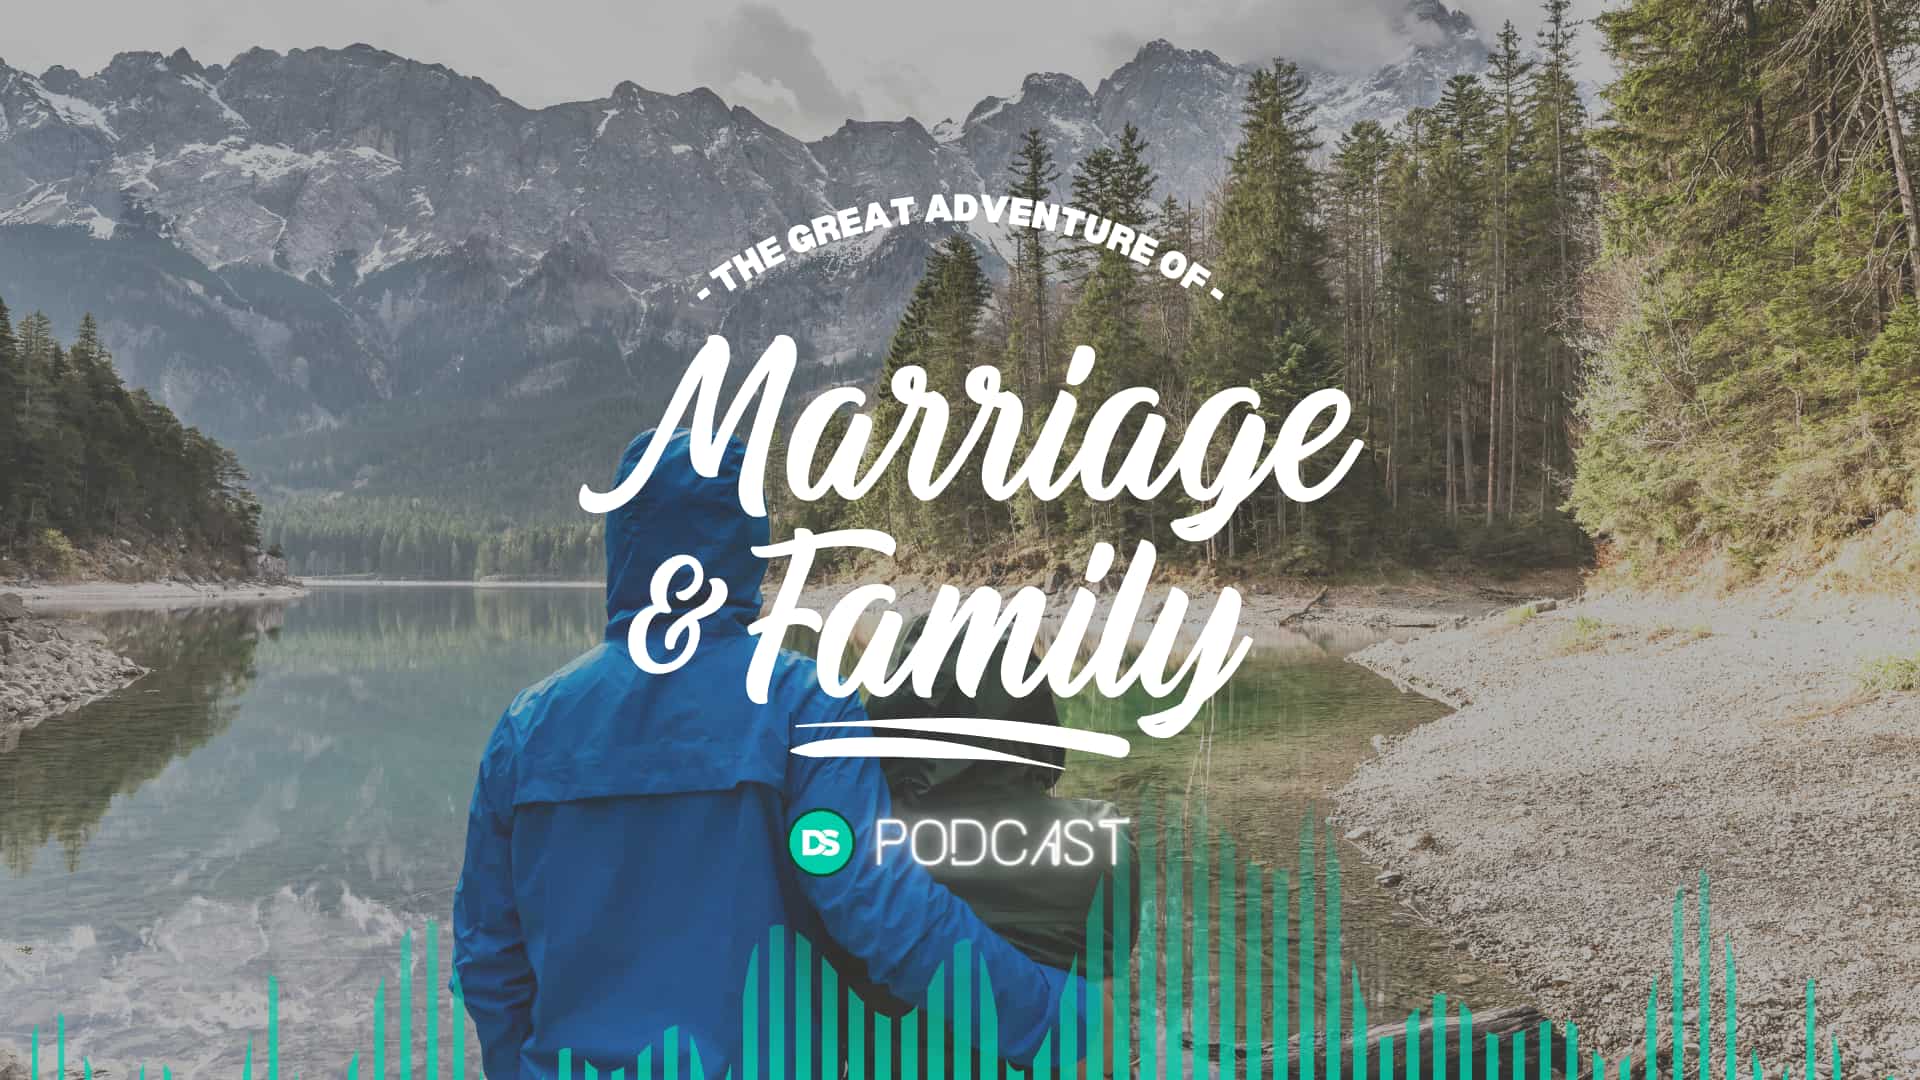 The Great Adventure of Marriage and Family 21